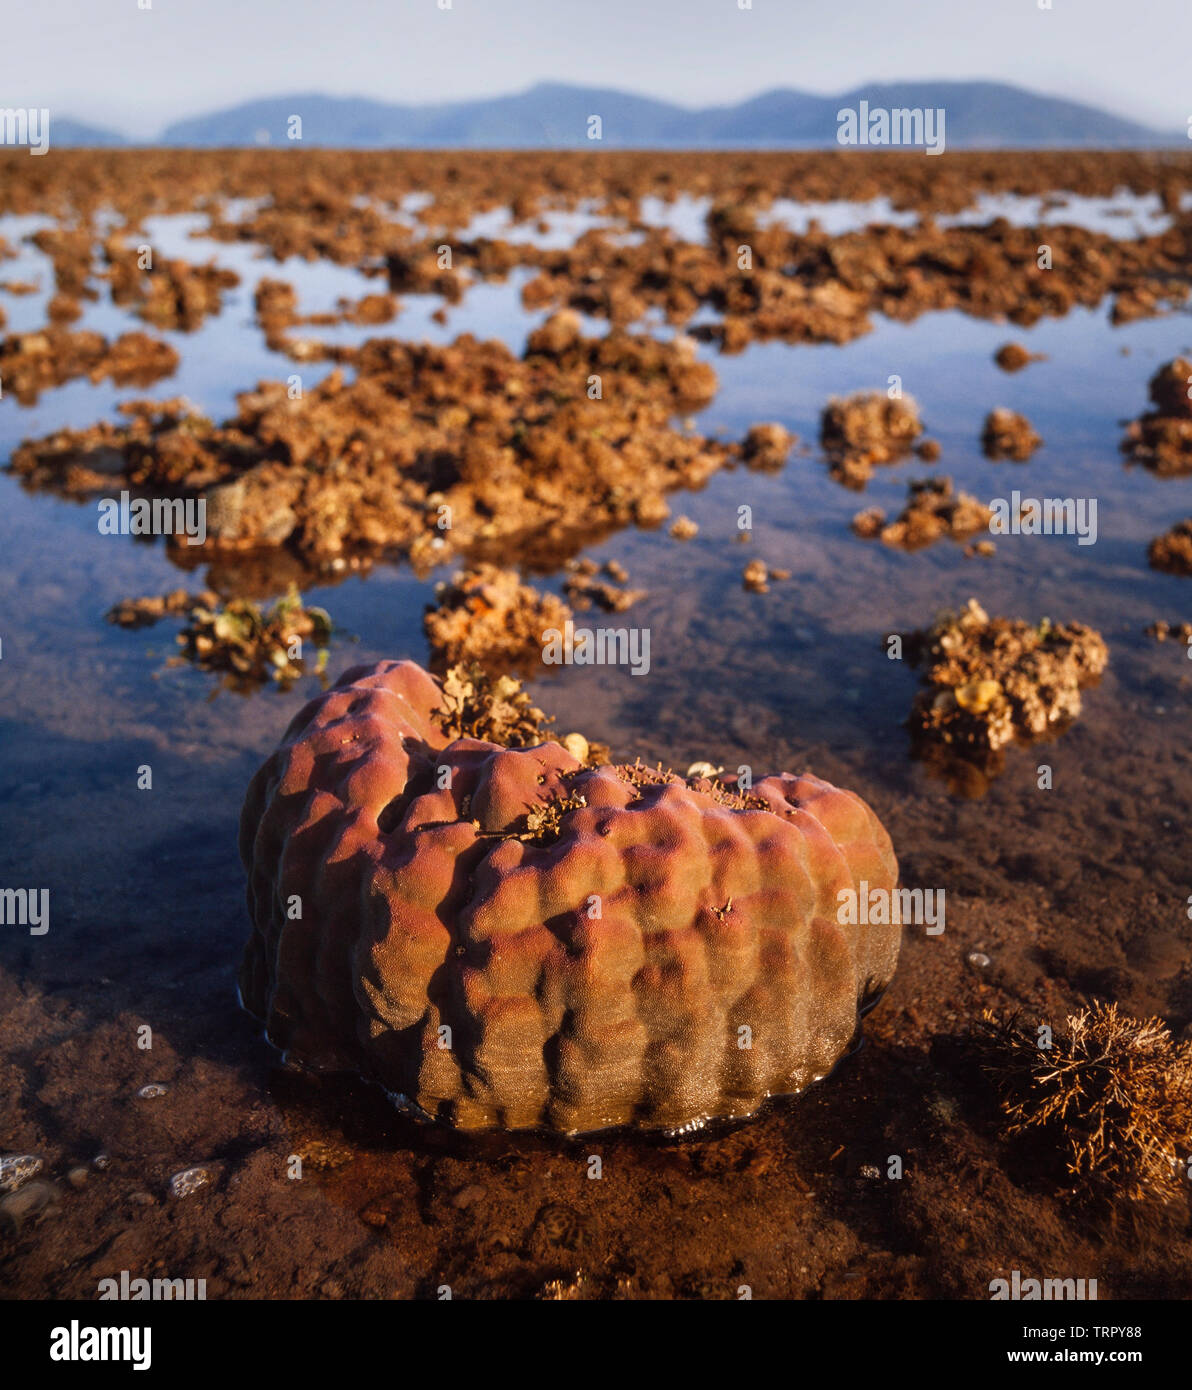 Sabah beach scene with exposed corals at low tide, Sabah, East Malaysia Stock Photo